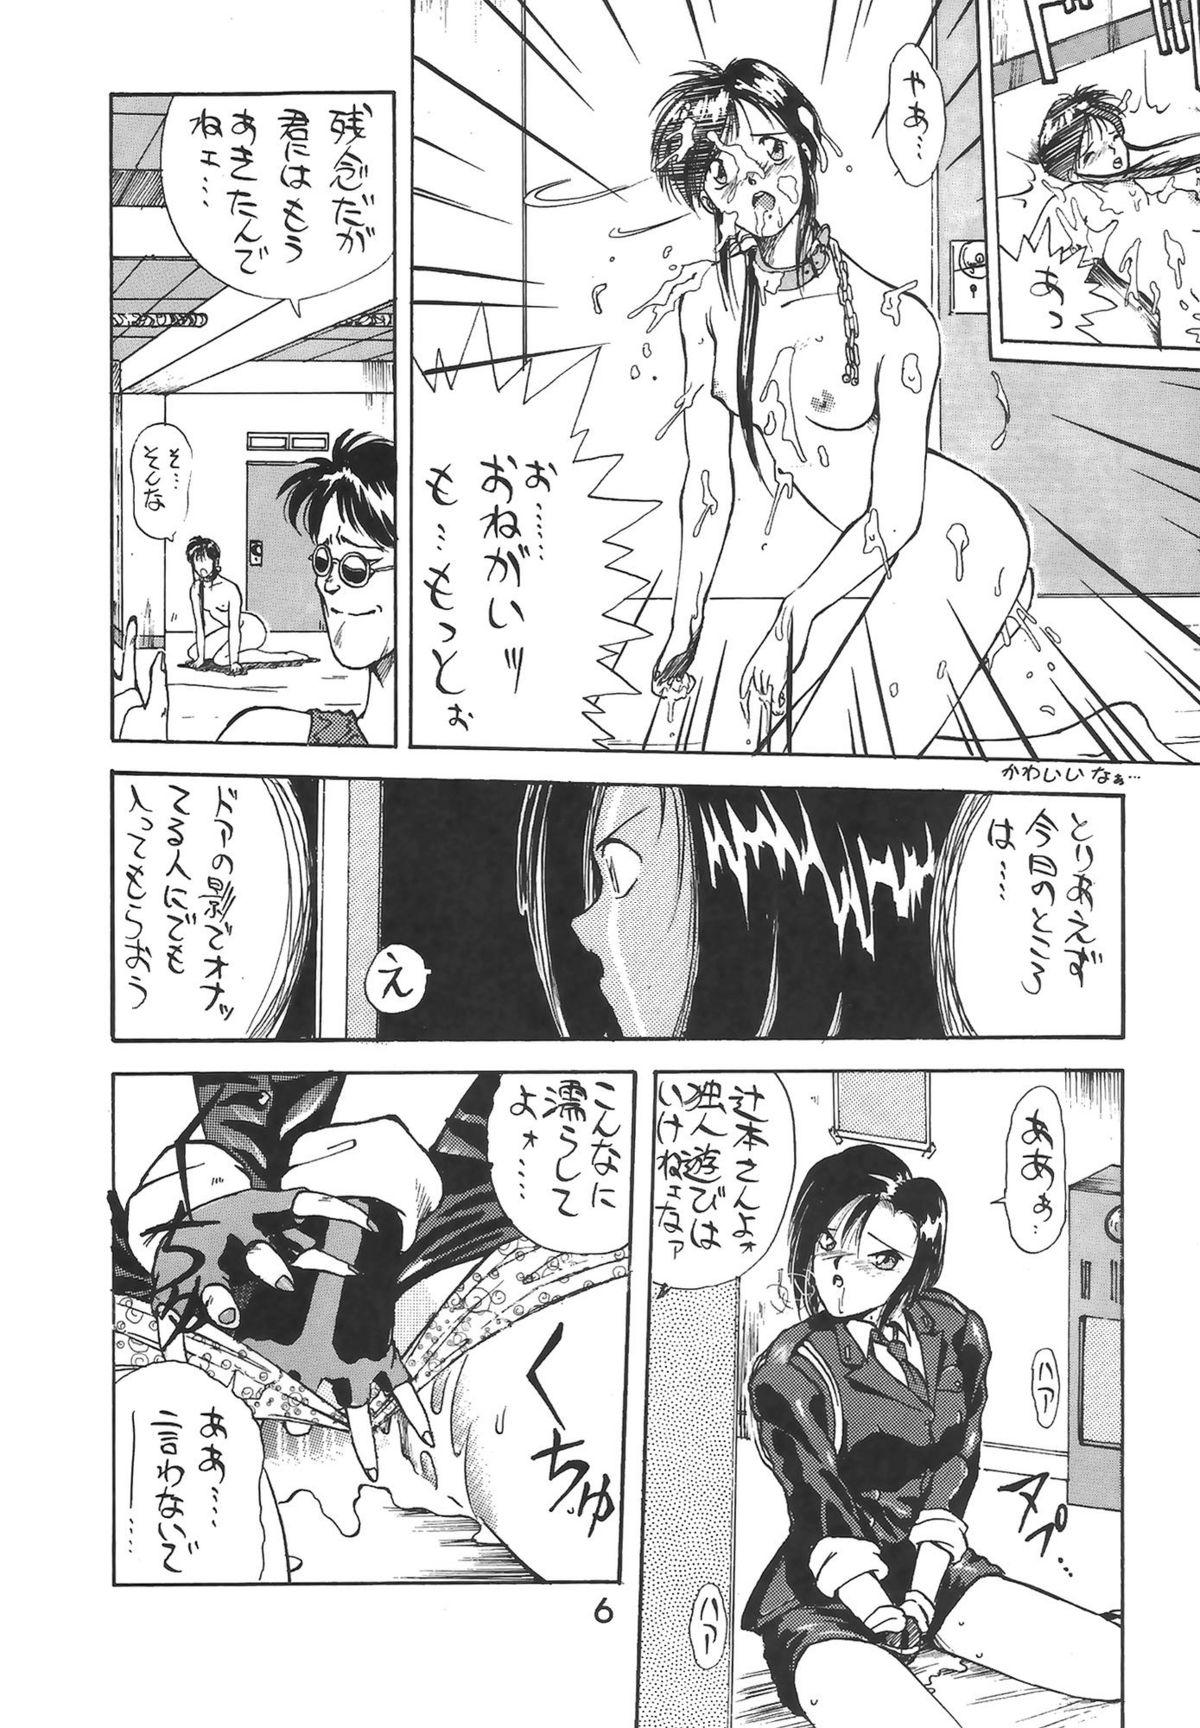 Long Hair Madonna Special 2 - Ah my goddess Youre under arrest Gay Cash - Page 6